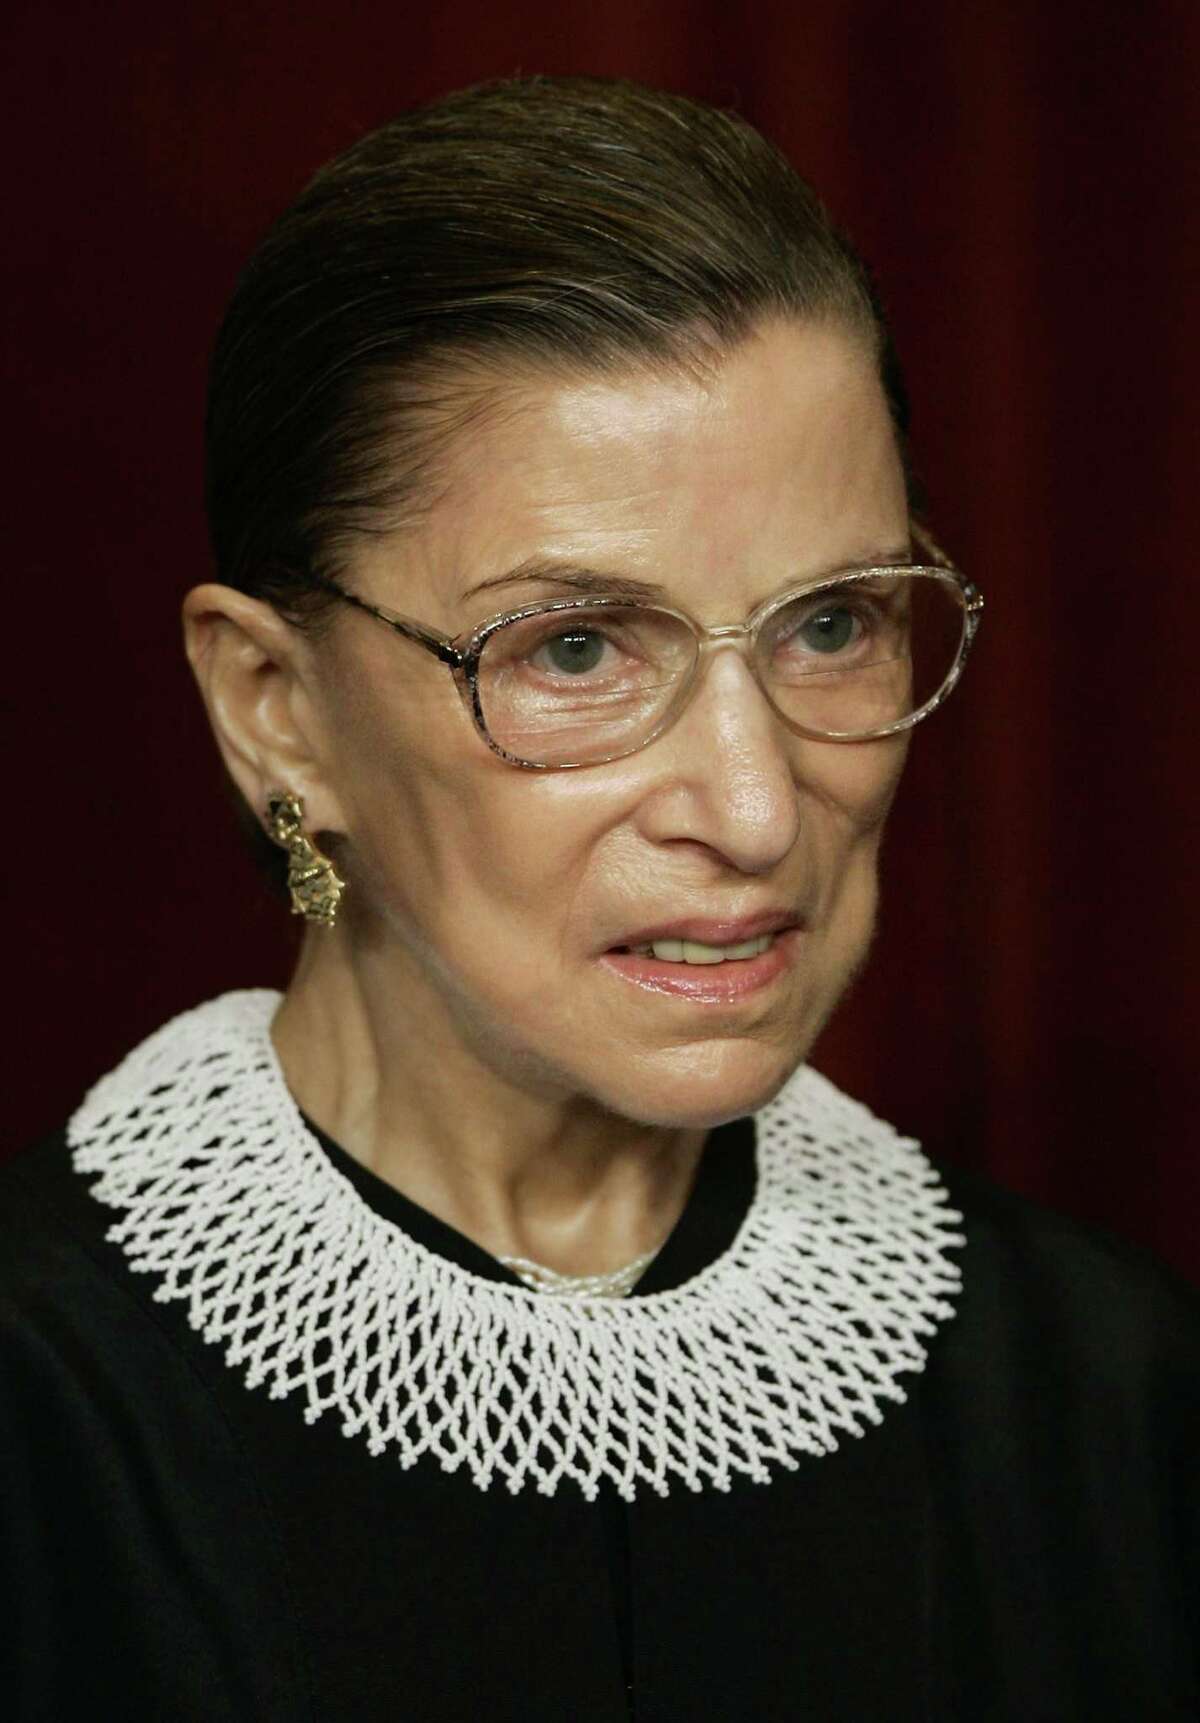 ** FILE ** In this March 3, 2006 file photo, Associate Justice Ruth Bader Ginsburg joins the members of the Supreme Court for photos during a group portrait session at the Supreme Court Building in Washington. Ginsburg died last week. (AP Photo/J. Scott Applewhite, File)